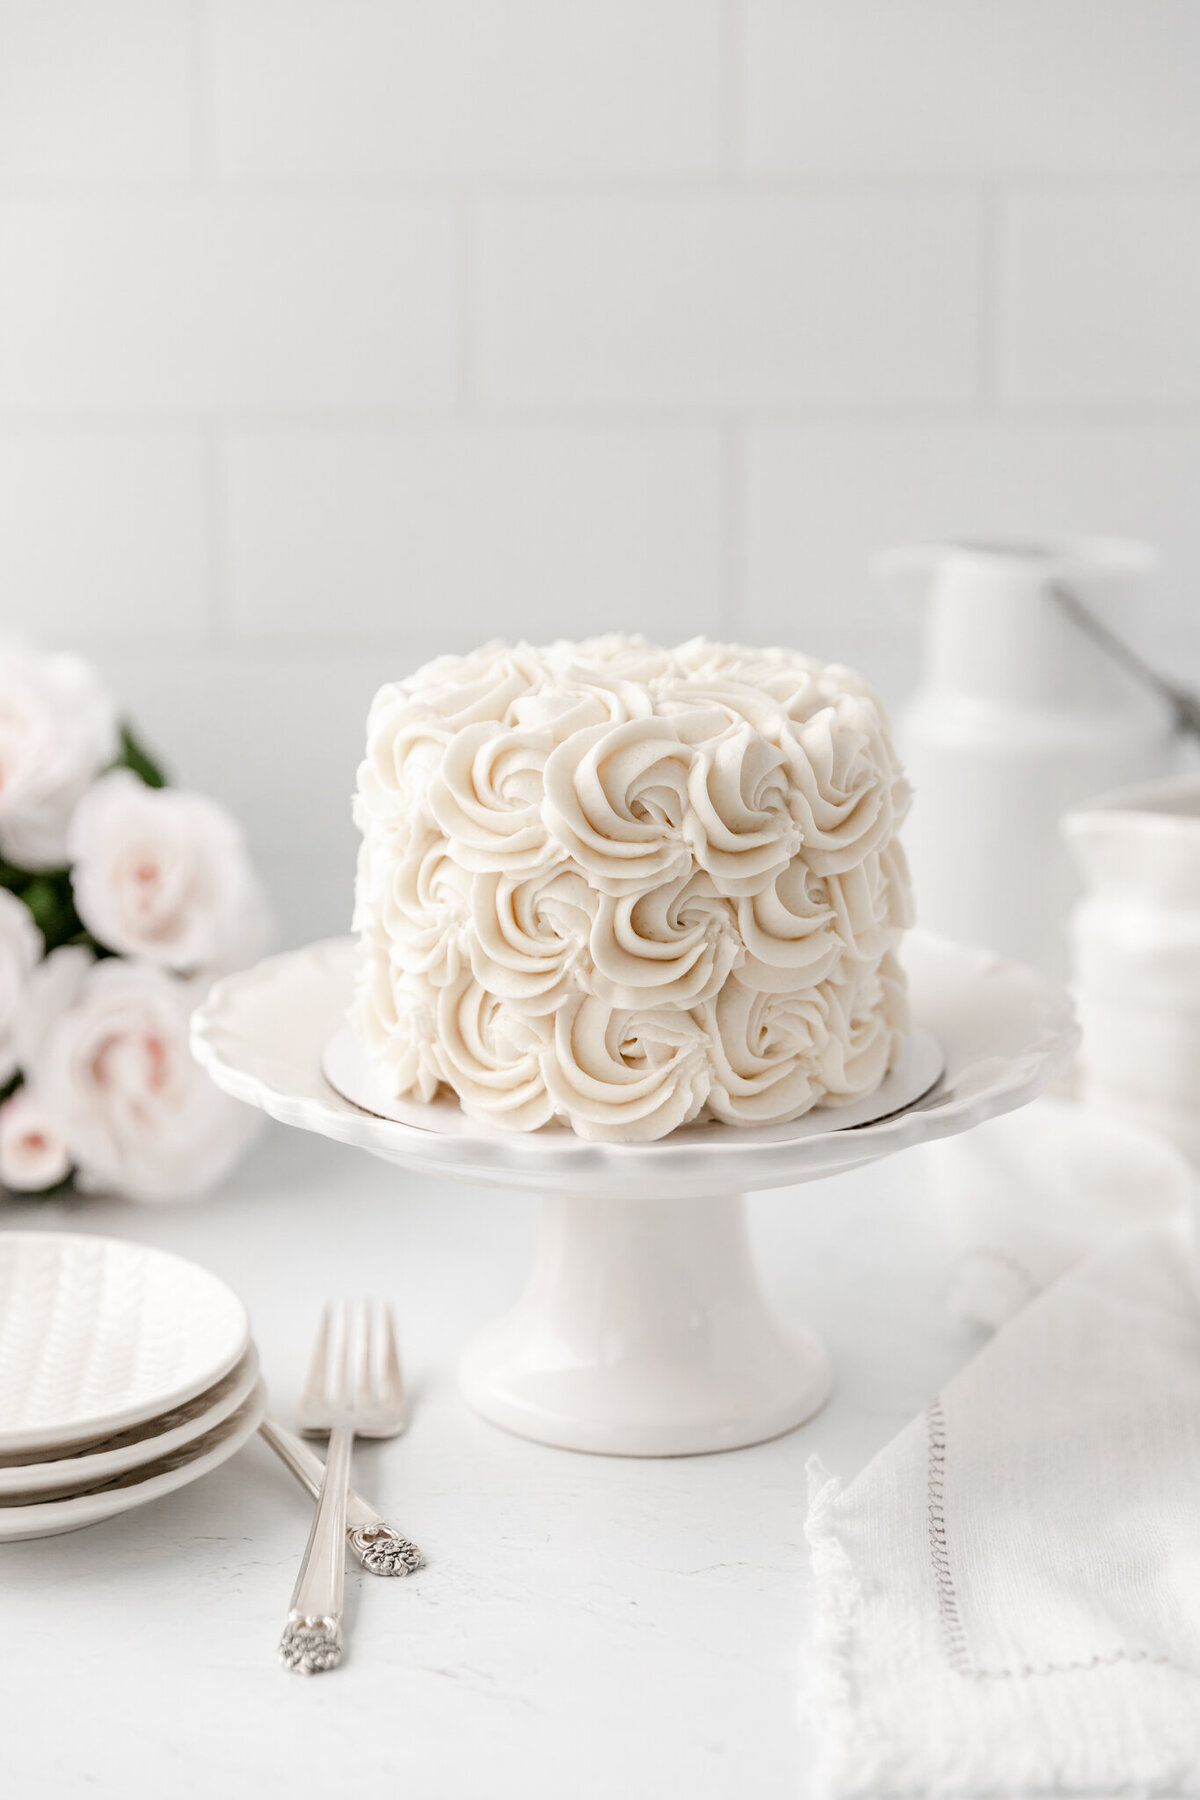 a cake decorated with a white rose frosting design